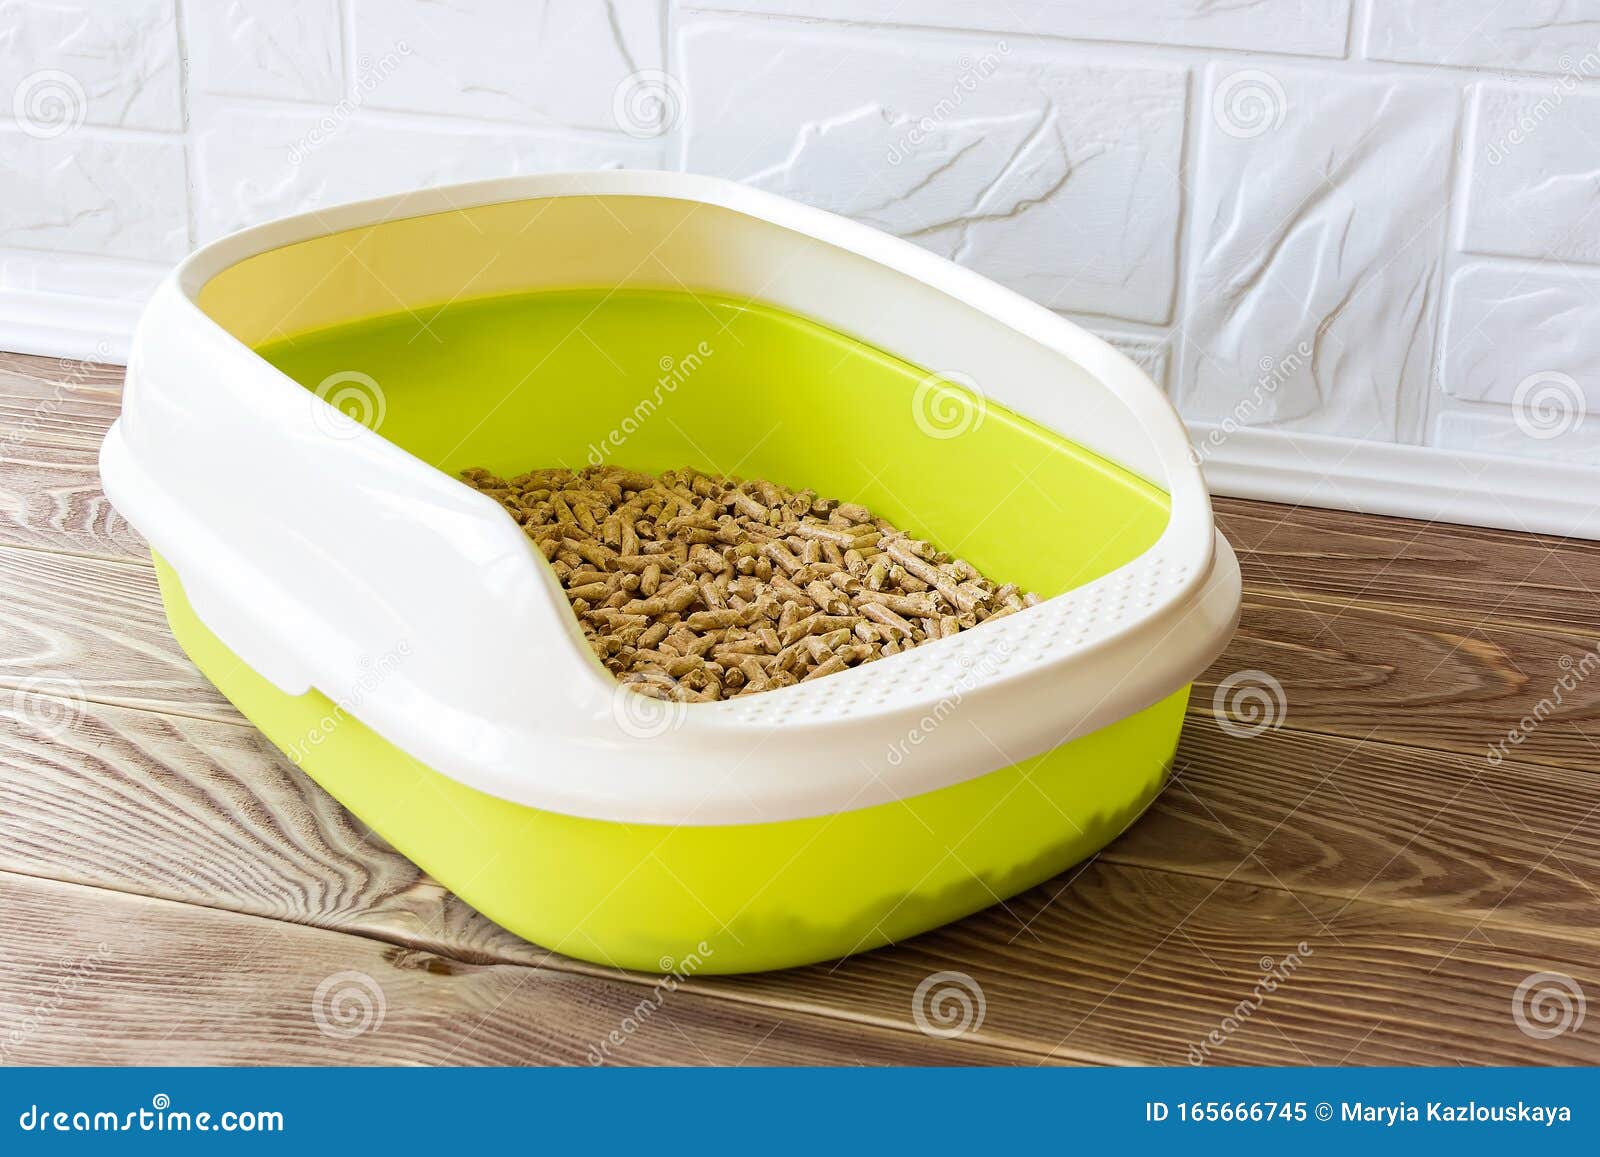 High Sided Cat Litter Tray With Wooden Pellets On A Brown Wooden Floor